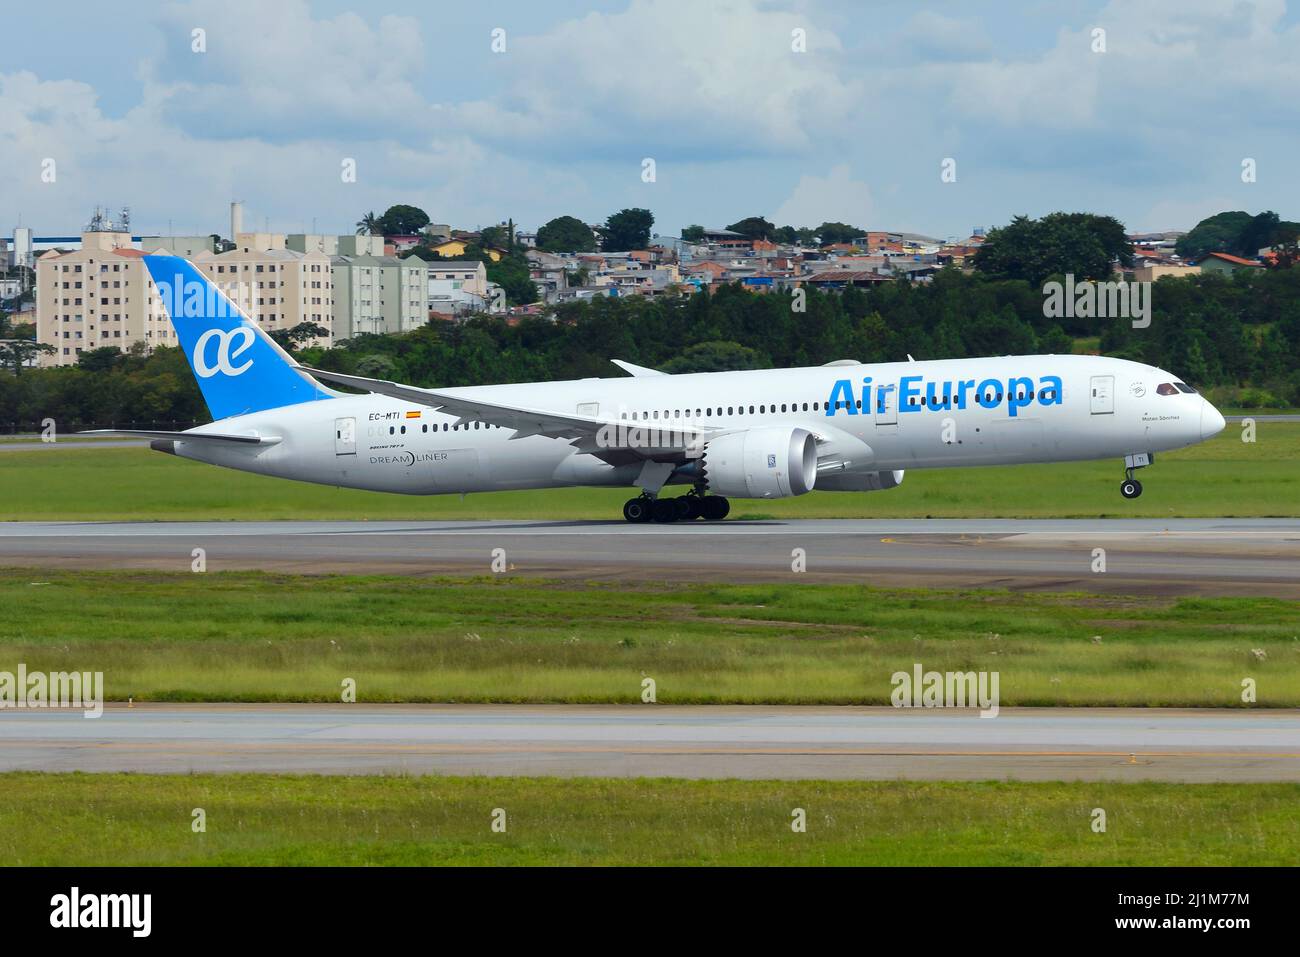 Air Europa Boeing 787 aircraft departing bound to Spain. Airplane 787-9 Dreamliner of AirEuropa taking off. Air Europa plane taking off. Stock Photo